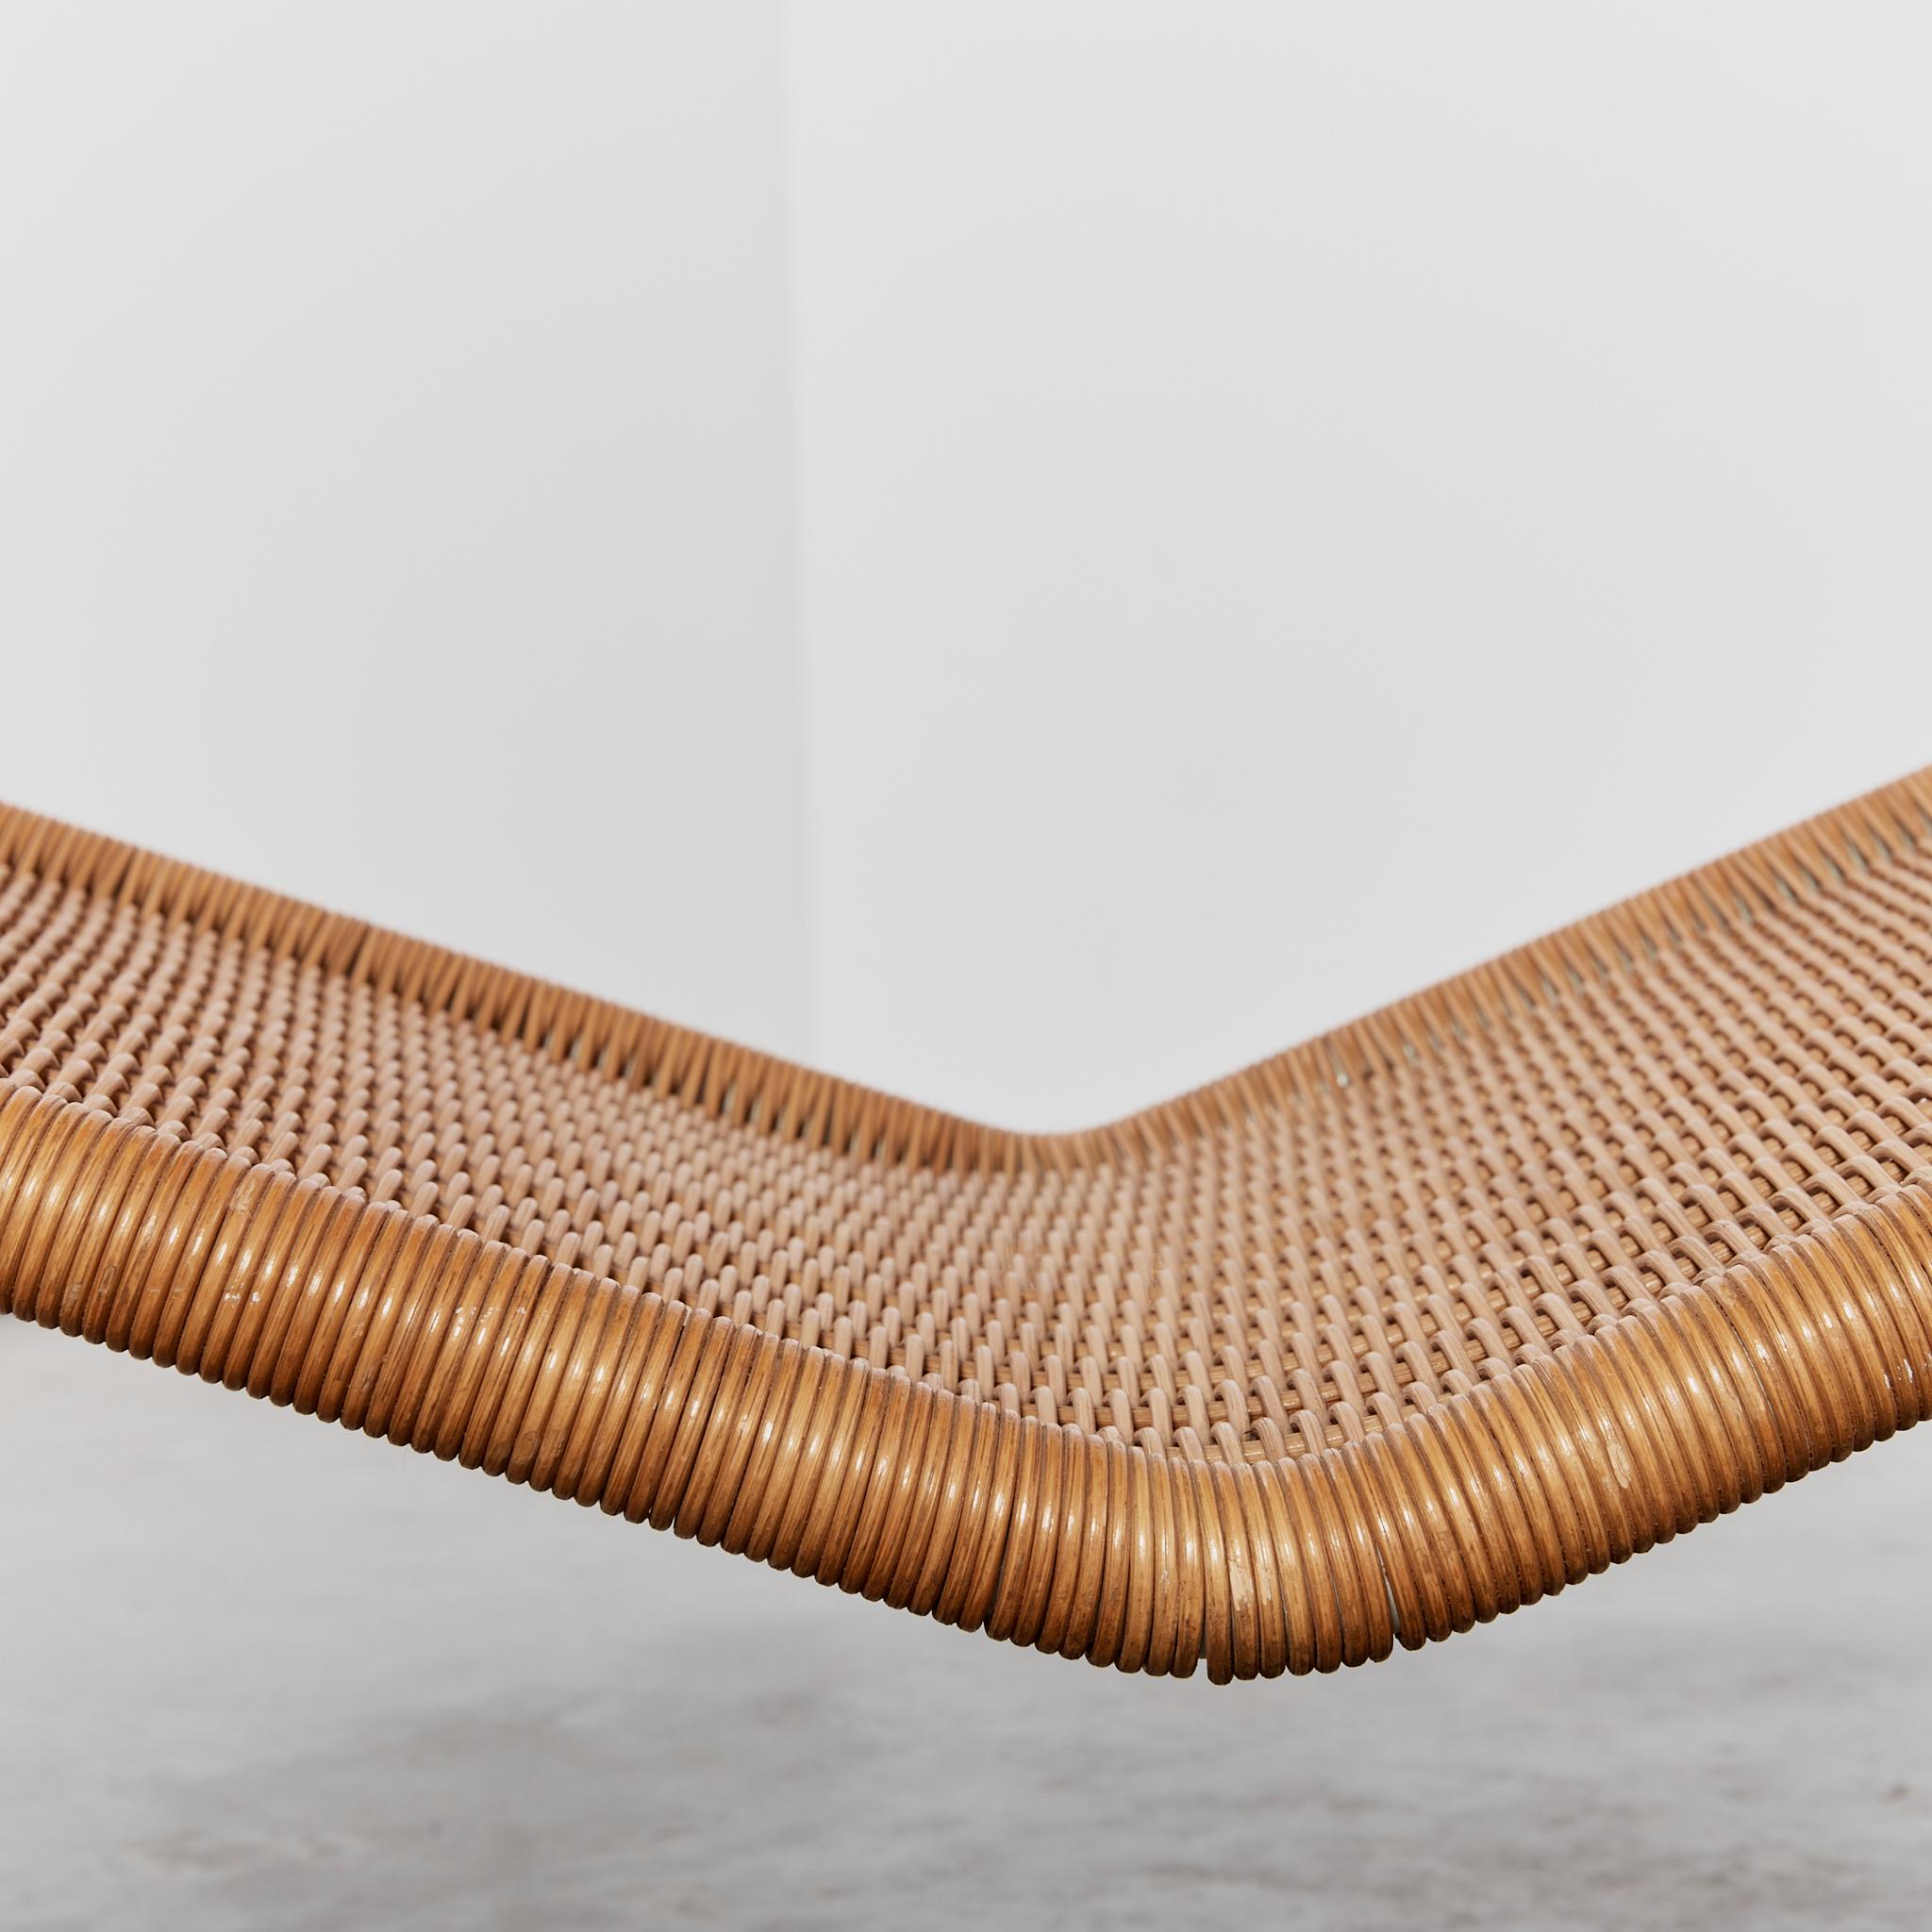 Rare P3 rattan chaise lounge chair by Tito Agnoli for Bocacina 1960's For Sale 8